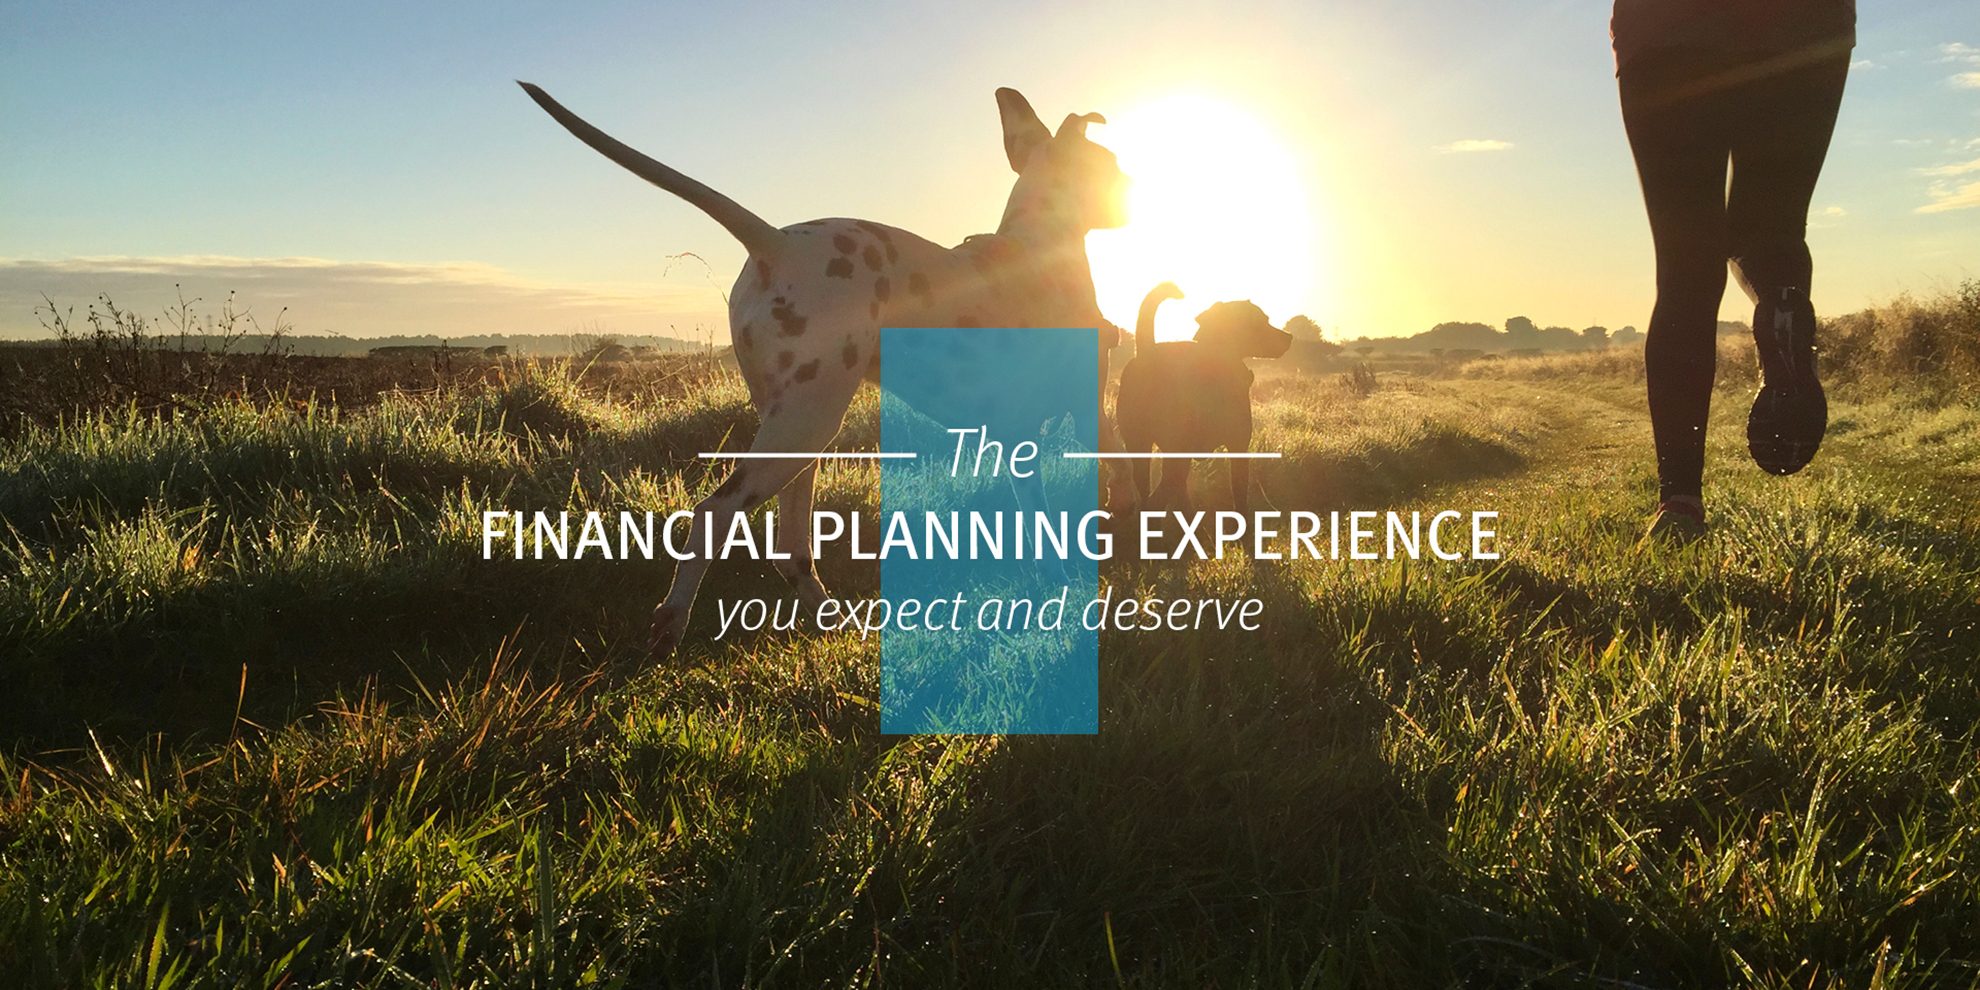 The Financial Planning Experience you expect and deserve